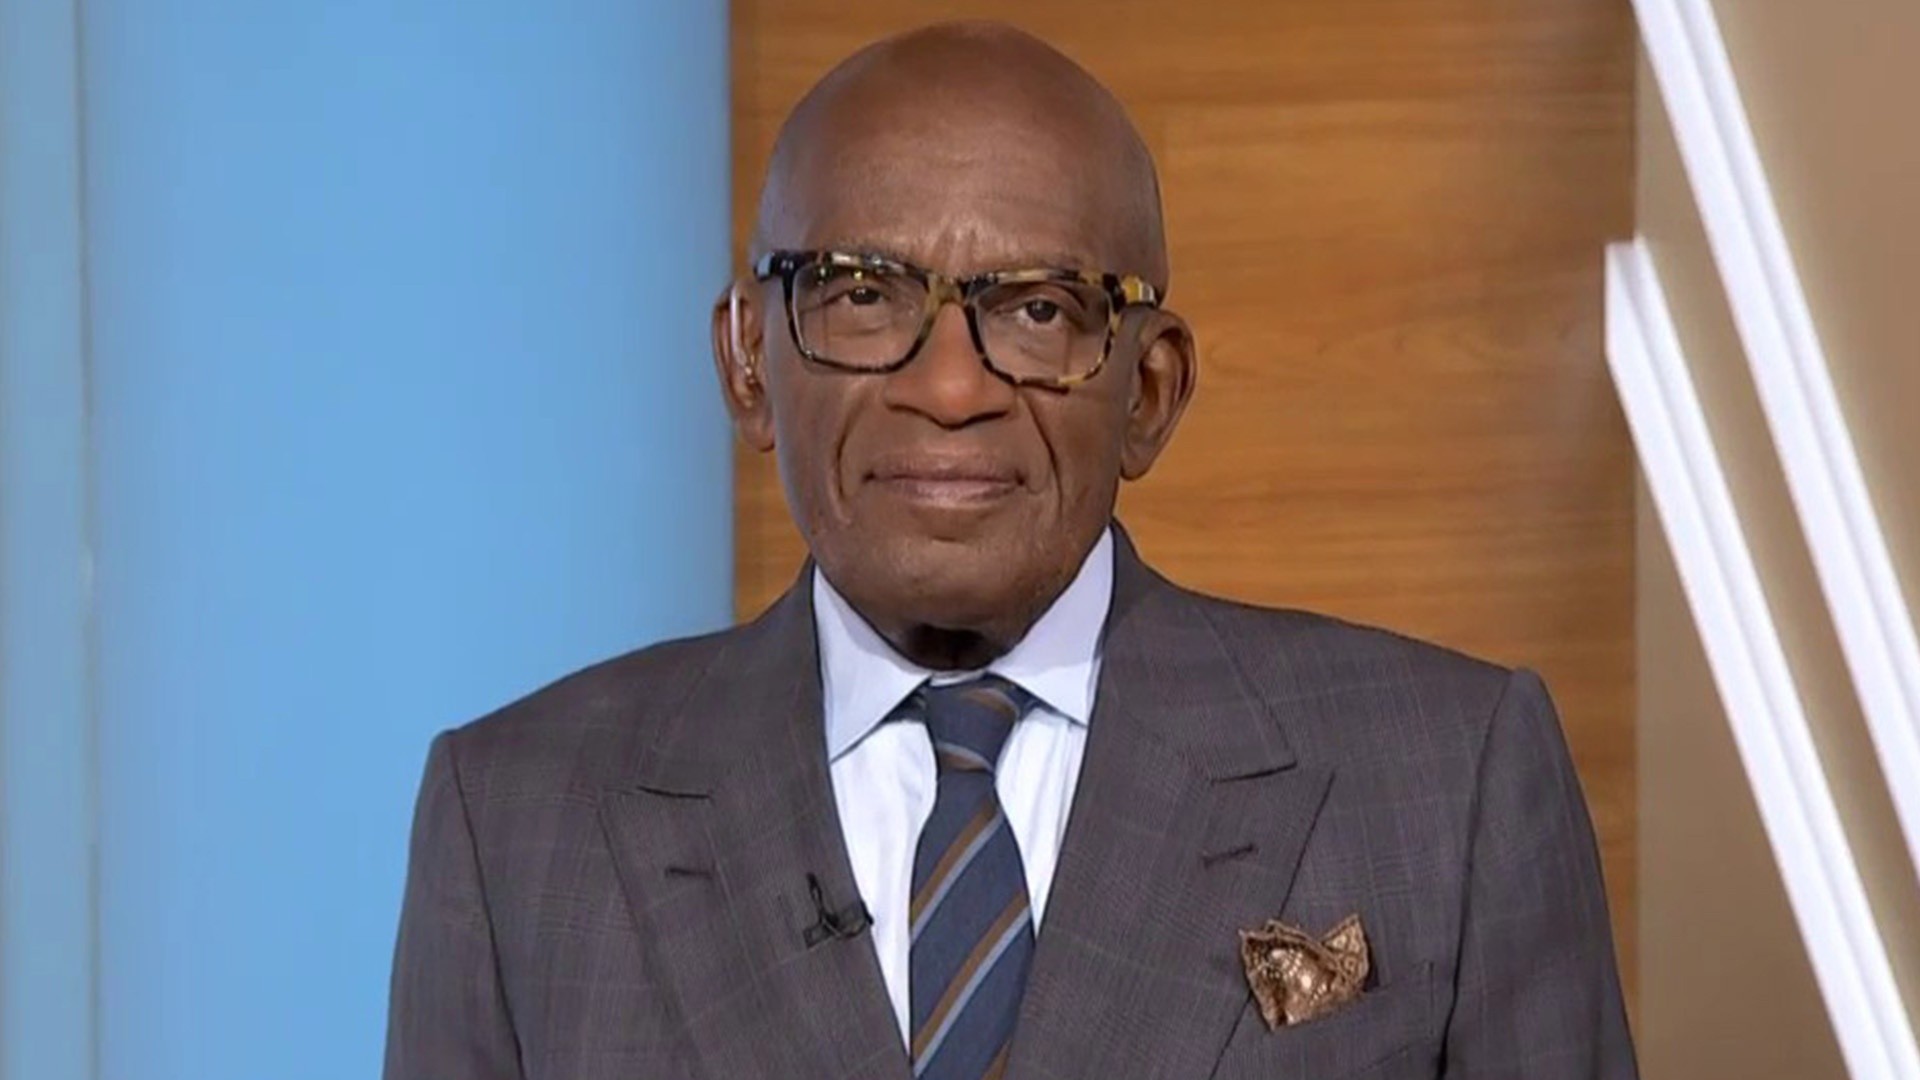 TODAY's Al Roker honored for work in raising cancer awareness